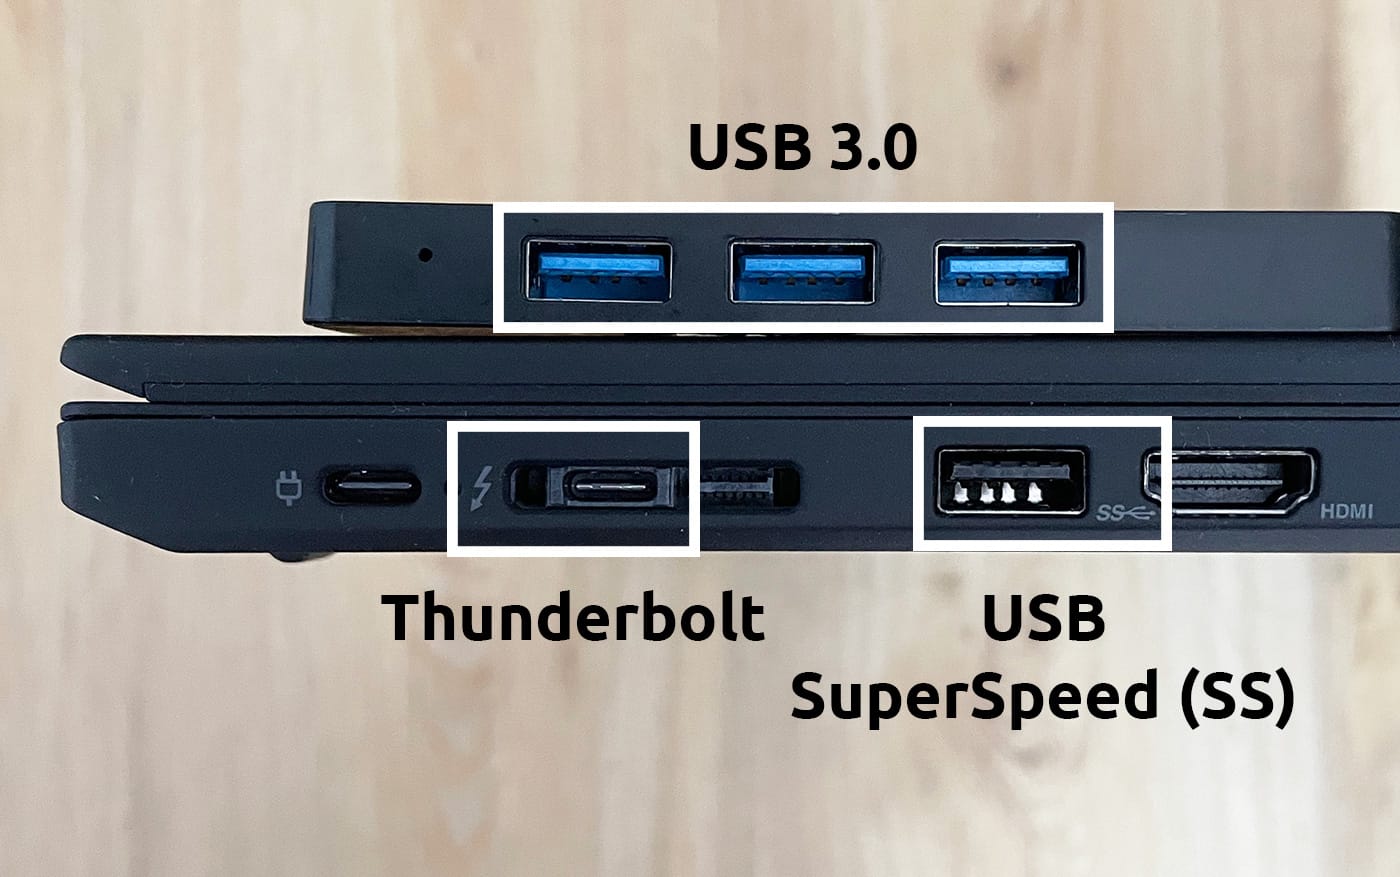 Some LapTop ports (Thunderbolt, USB SuperSpeed) and USB 3.0 ports on an USB hub